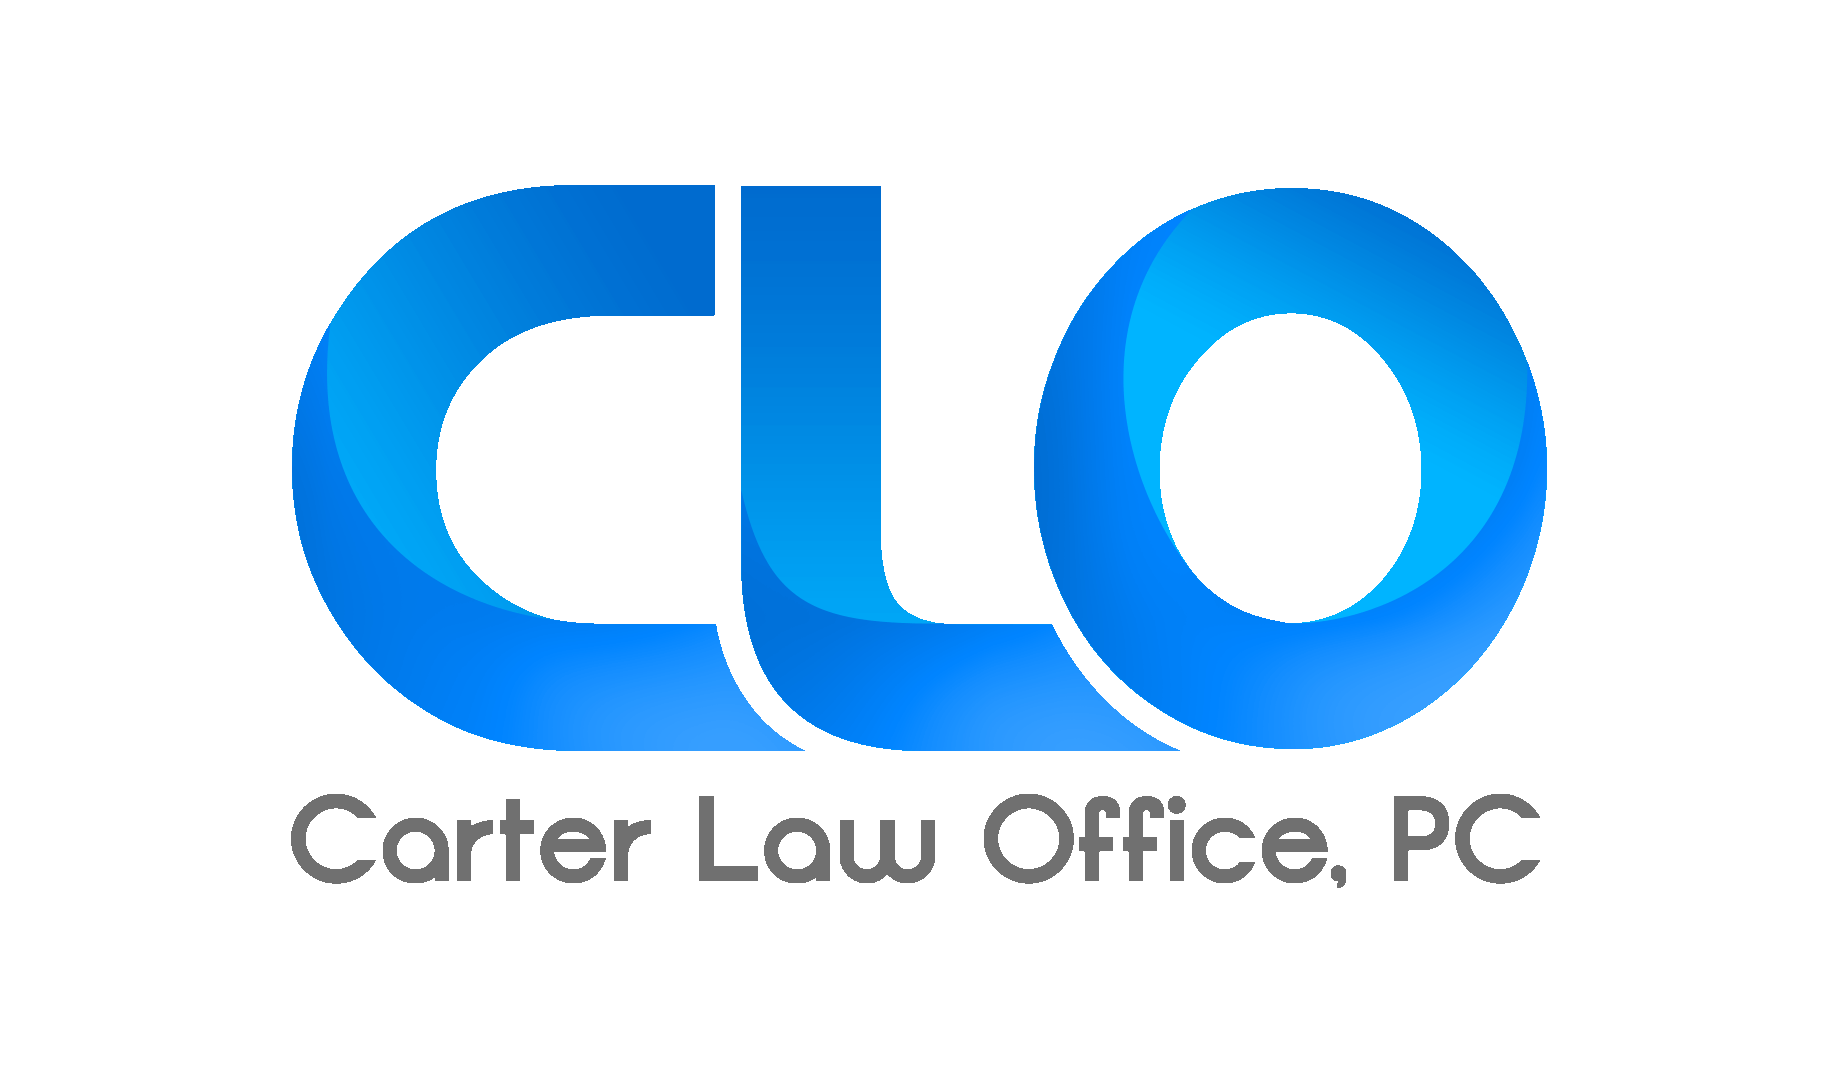 Carter Law Office, PC